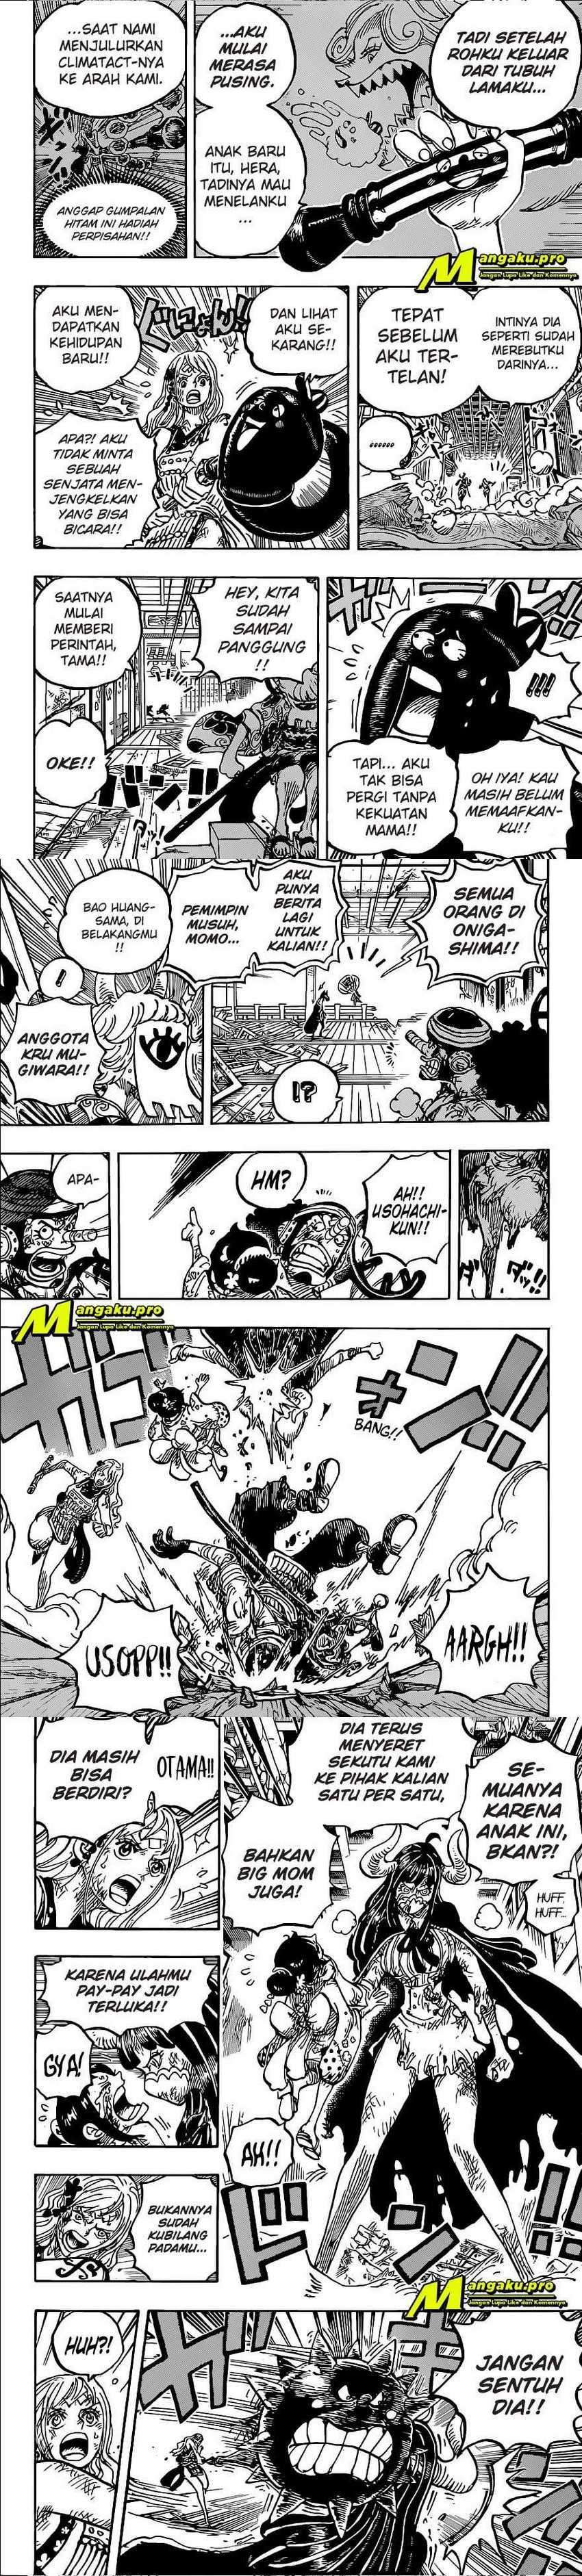 One Piece Chapter 1016 HQ Image 1